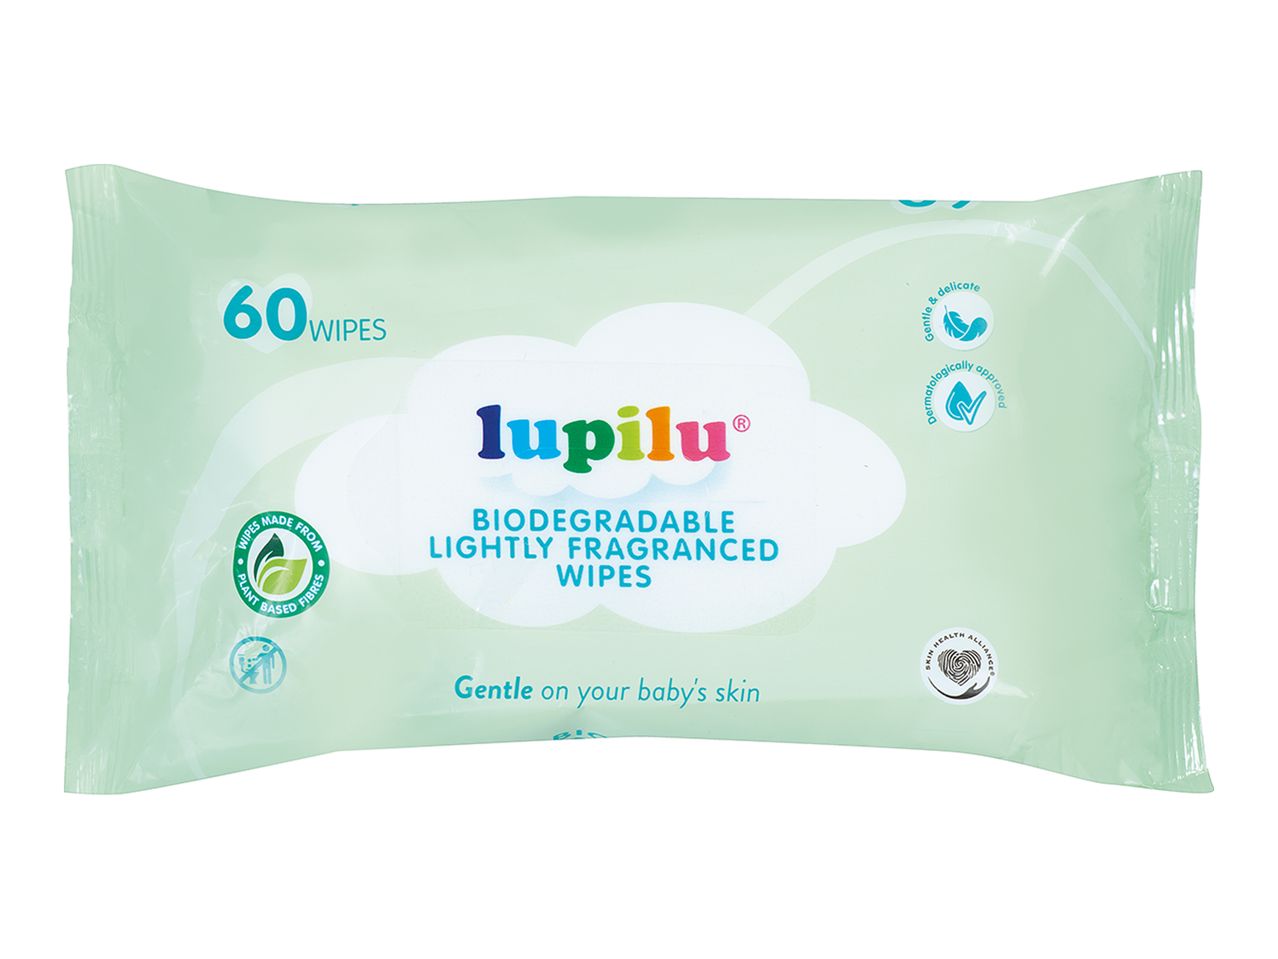 Go to full screen view: Biodegradable Lightly Fragranced Baby Wipes - Image 1